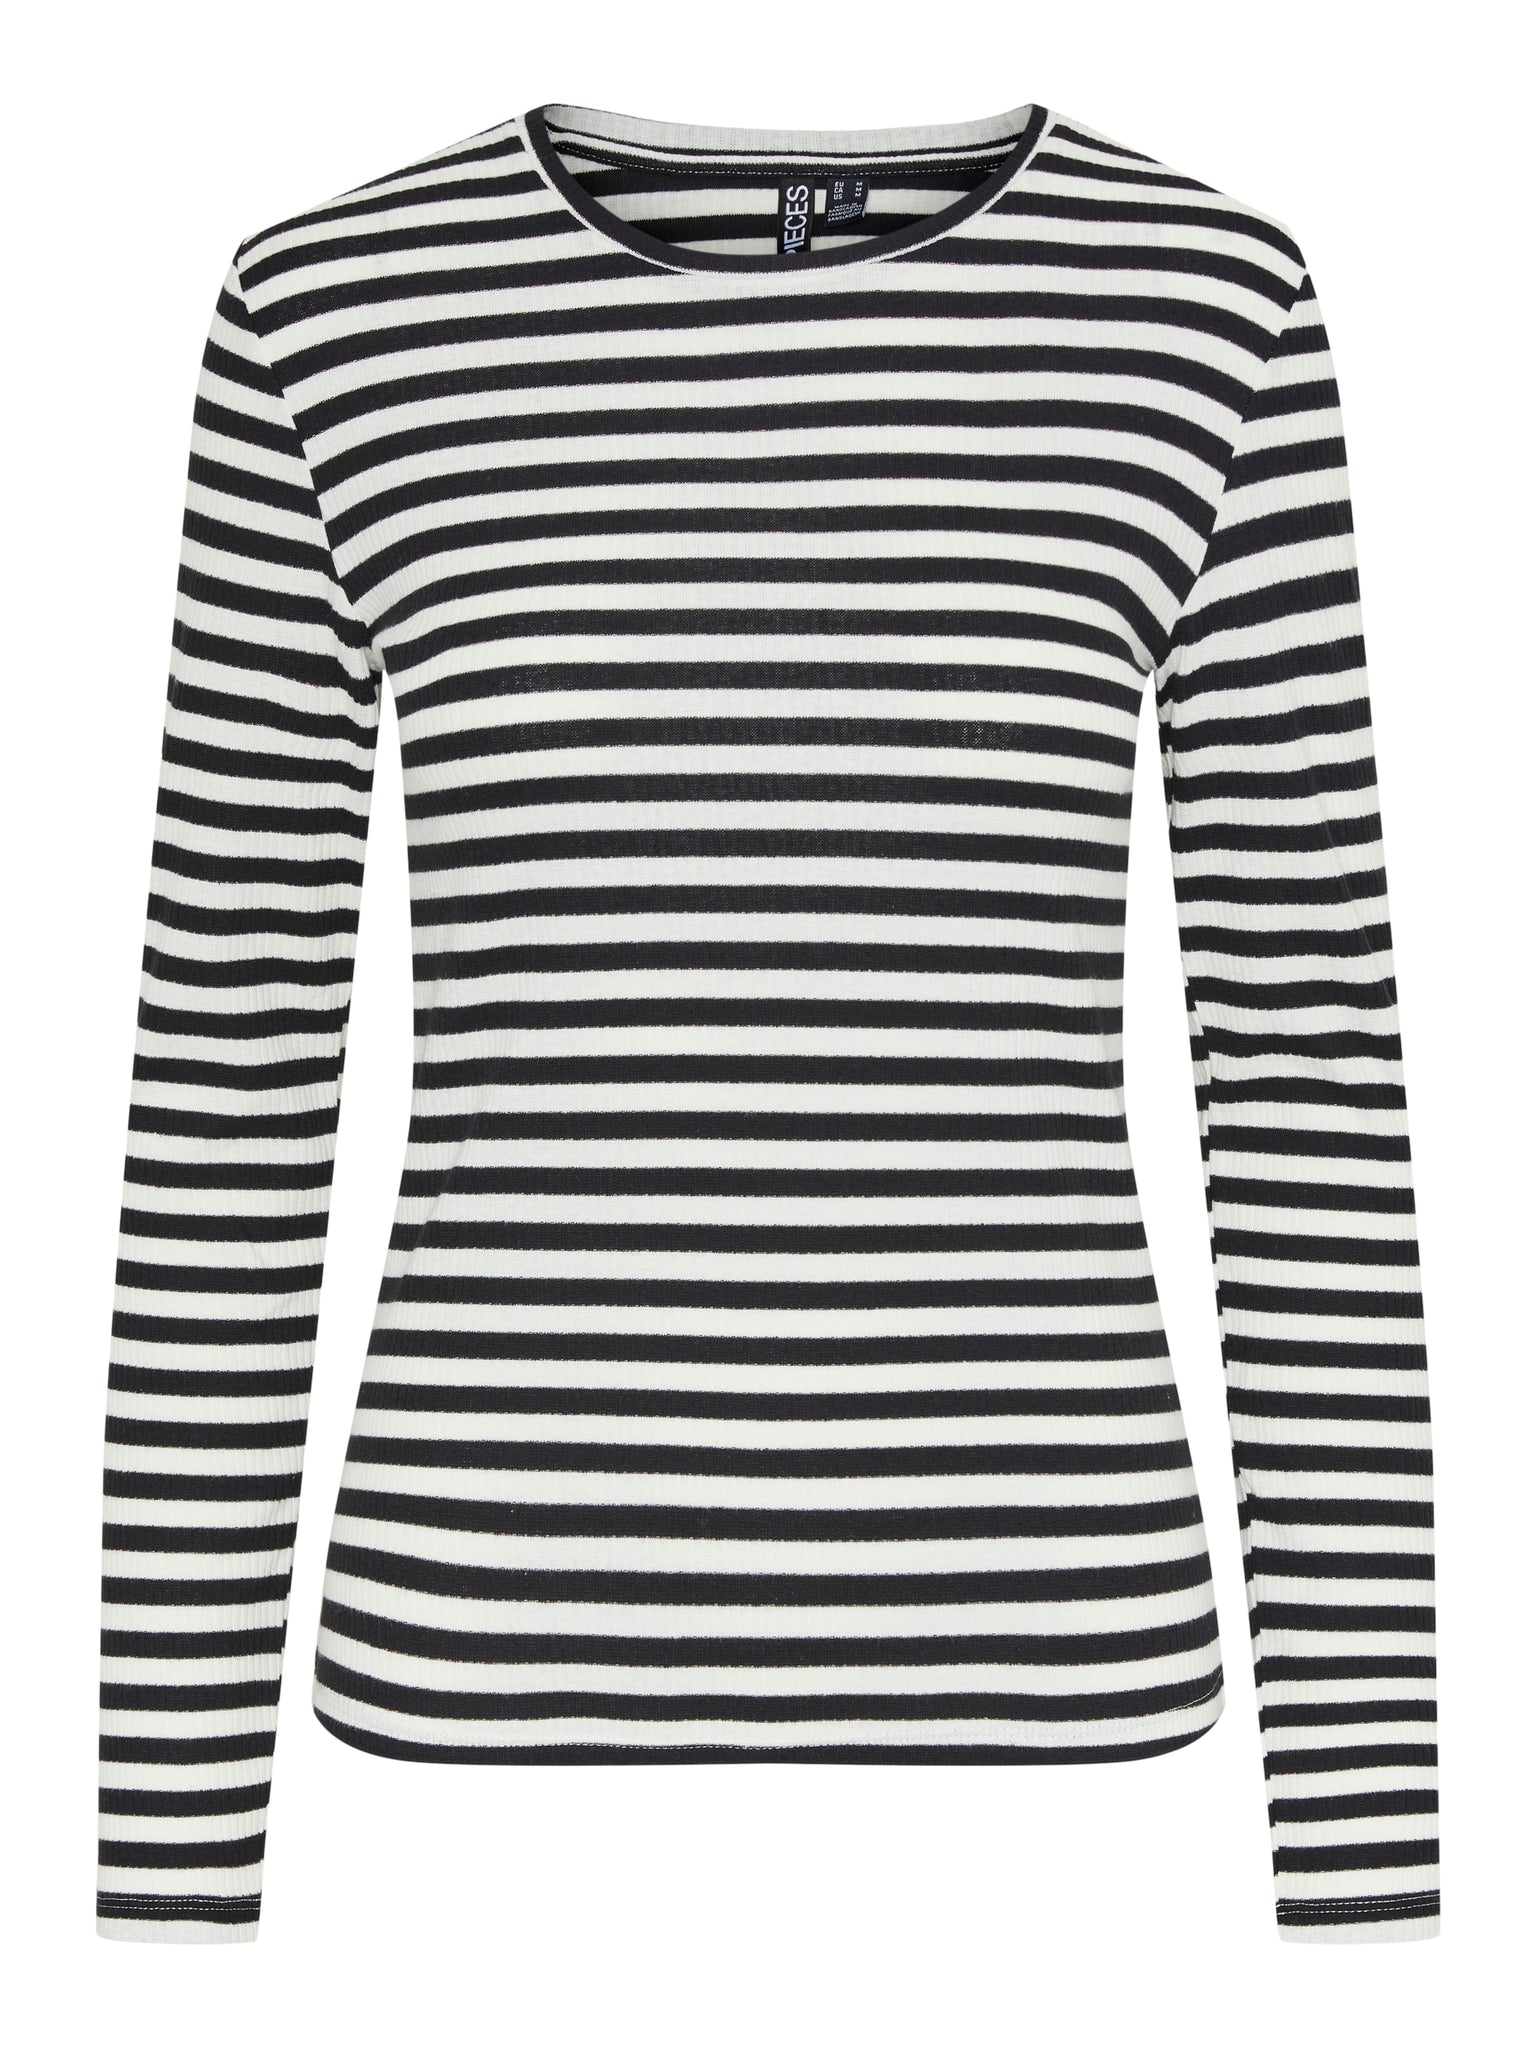 Pieces Long Sleeve Striped Top in Black